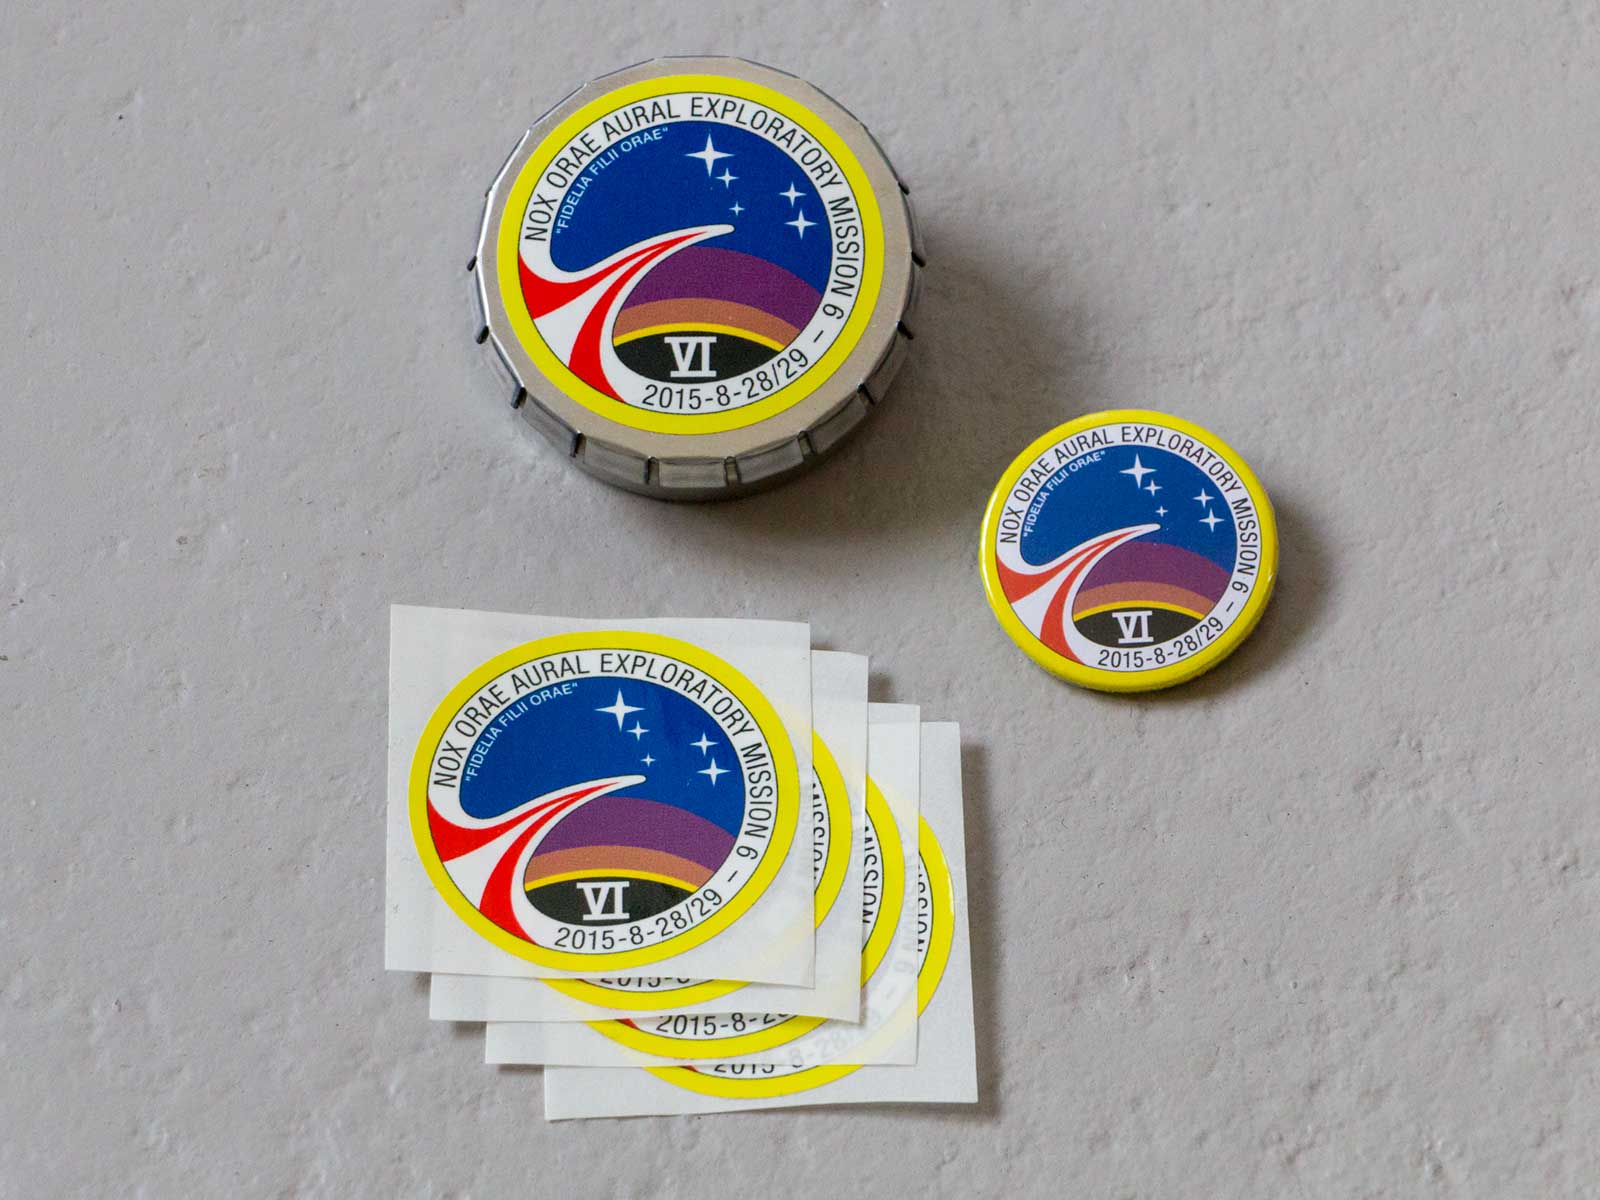 Pocket ashtray, button badge and stickers| © AG